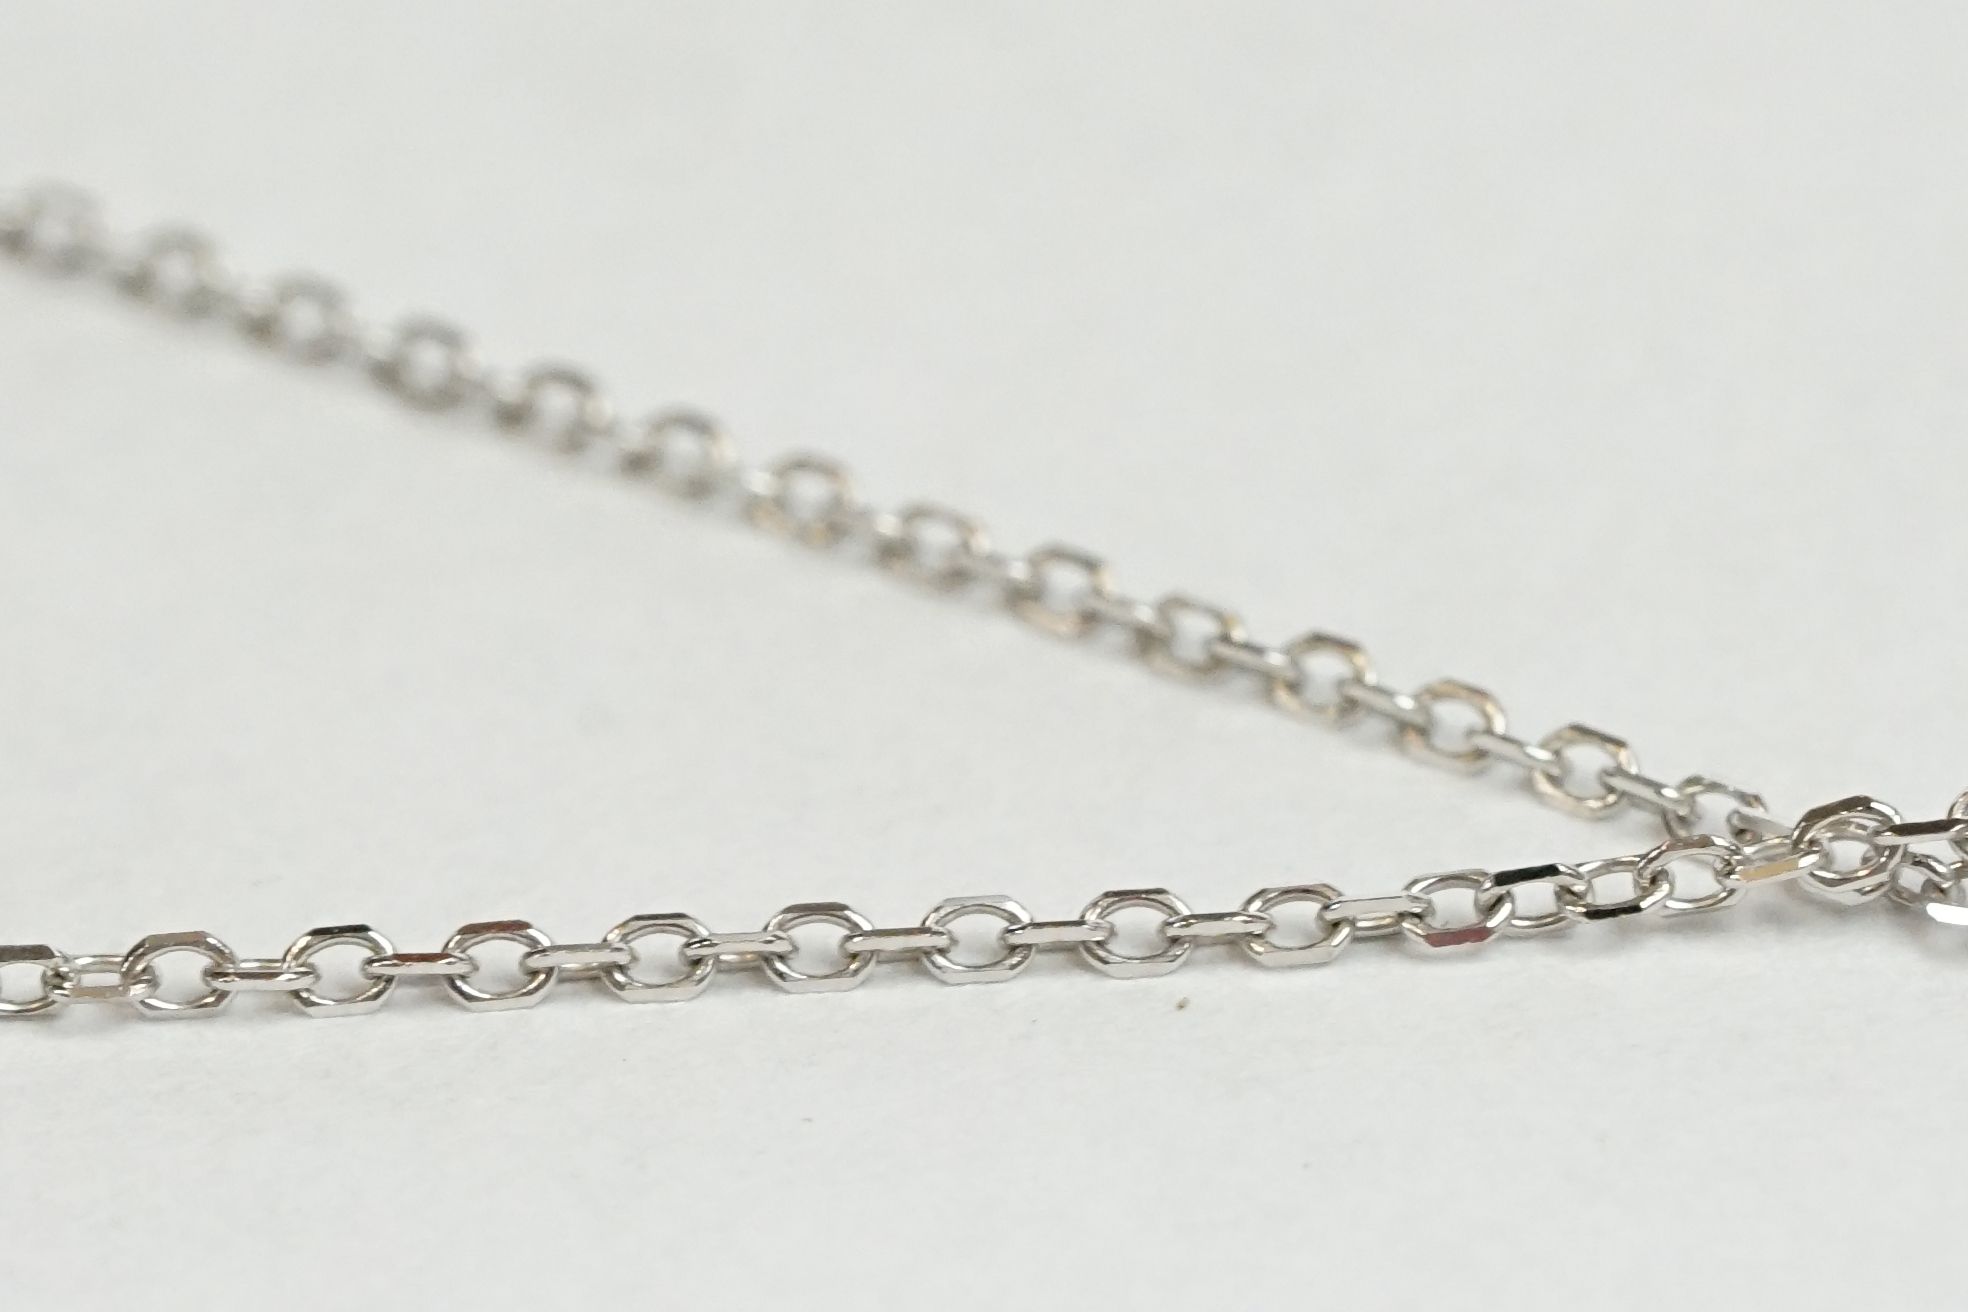 18ct White Gold Diamond Pendant of 25 points approx. total on gold chain - Image 8 of 11